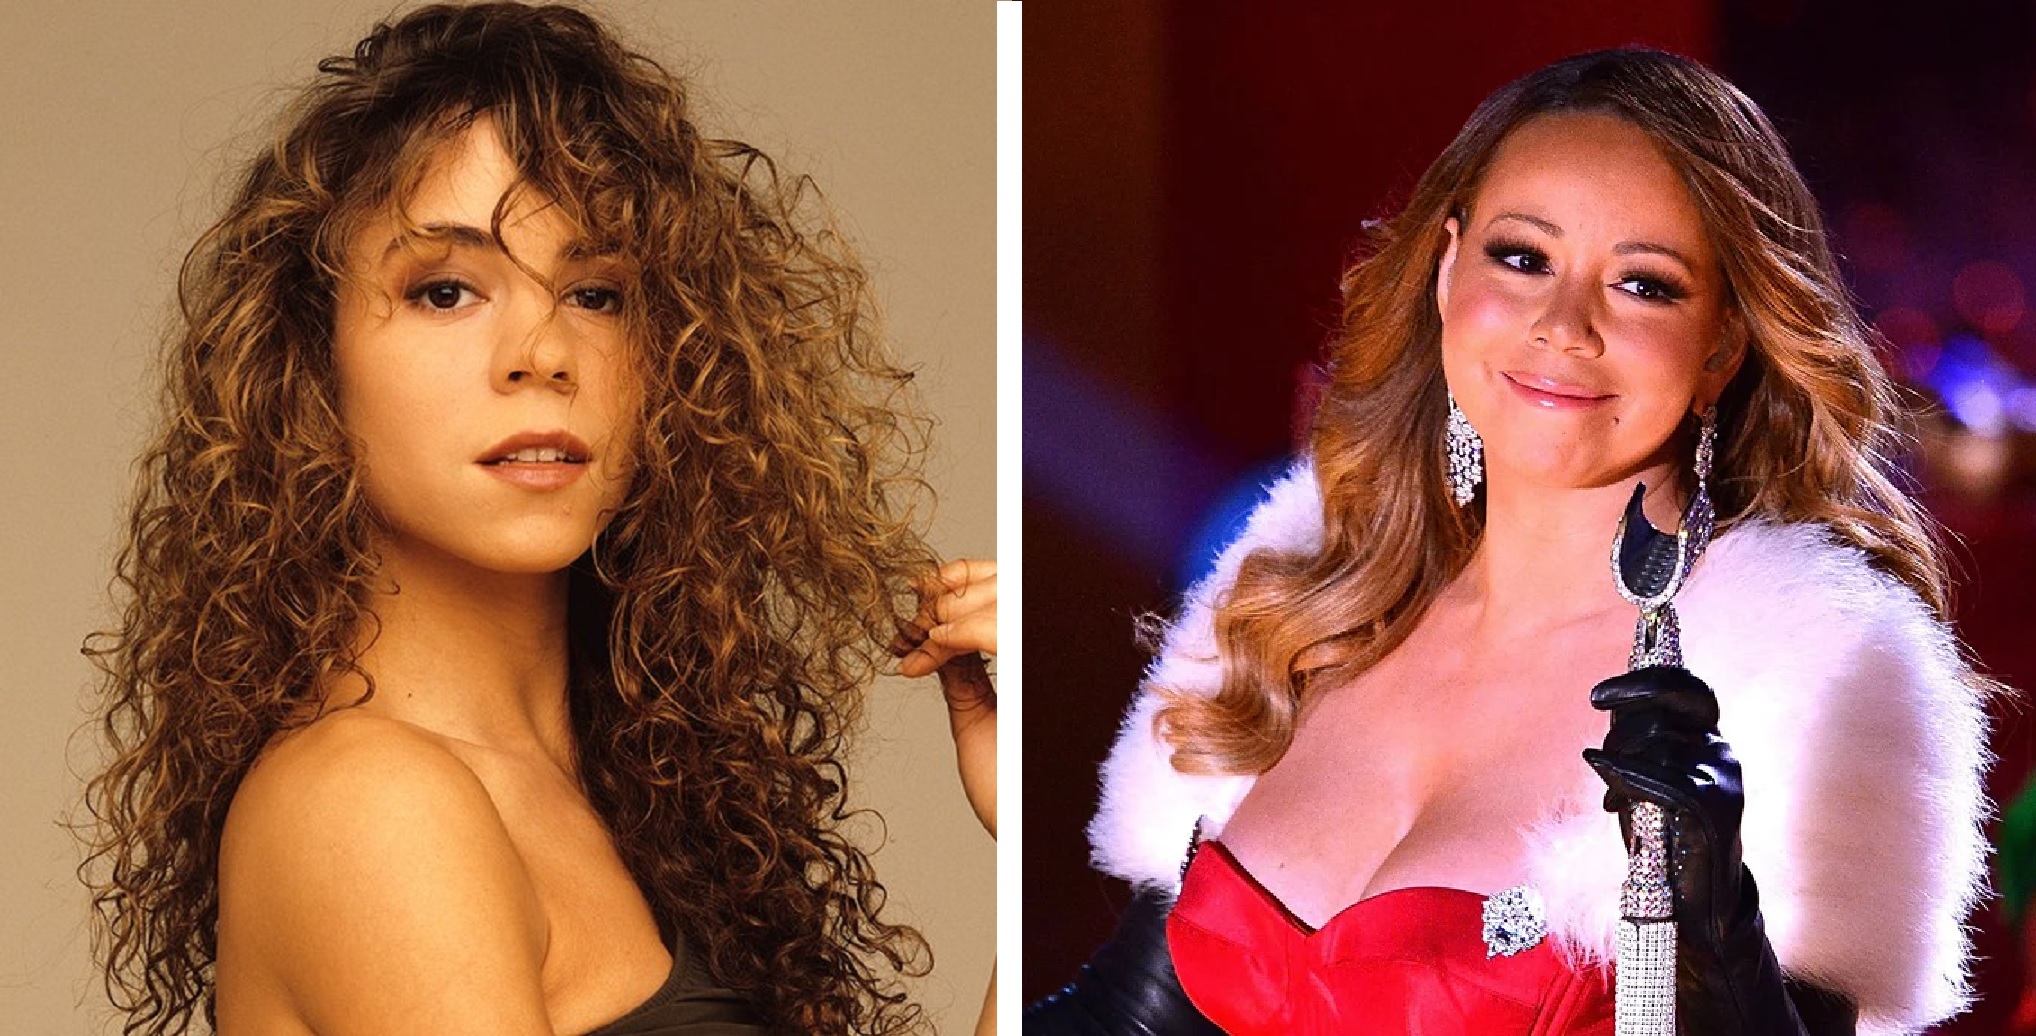 The Top 10 Best Songs of Mariah Carey – Definitive Hits From the Diva